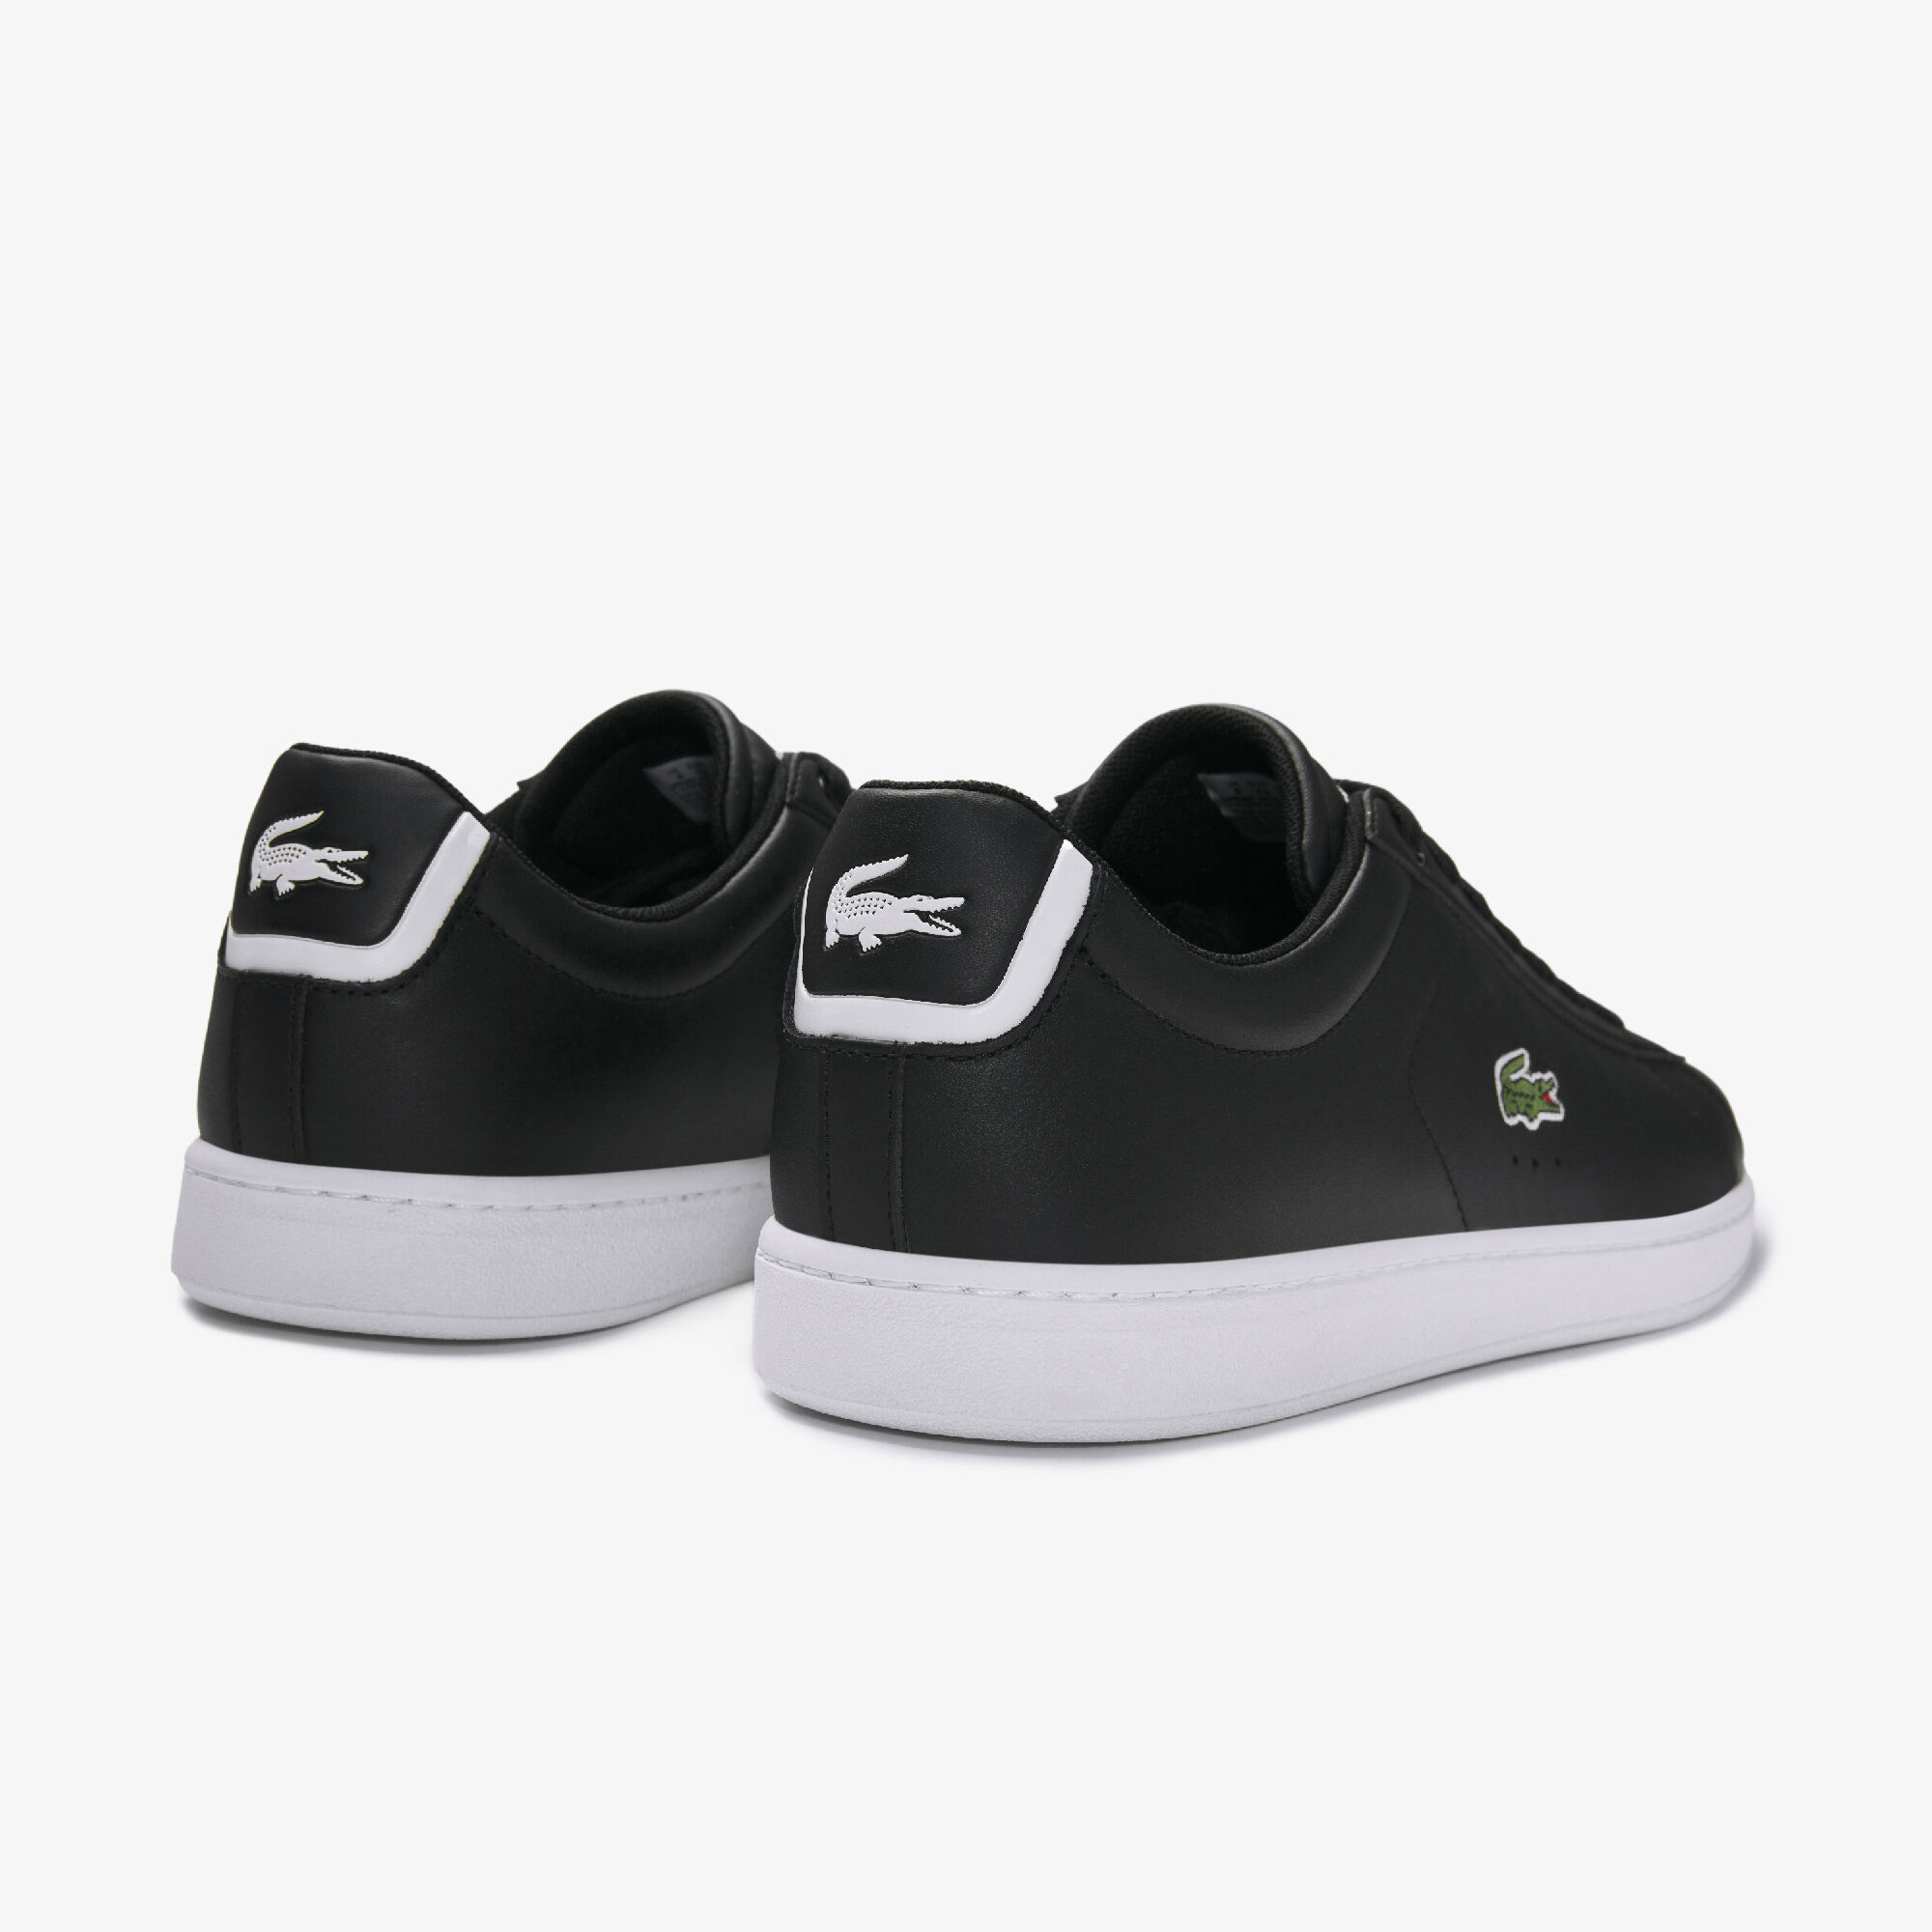 Men's Carnaby Evo Leather Trainers